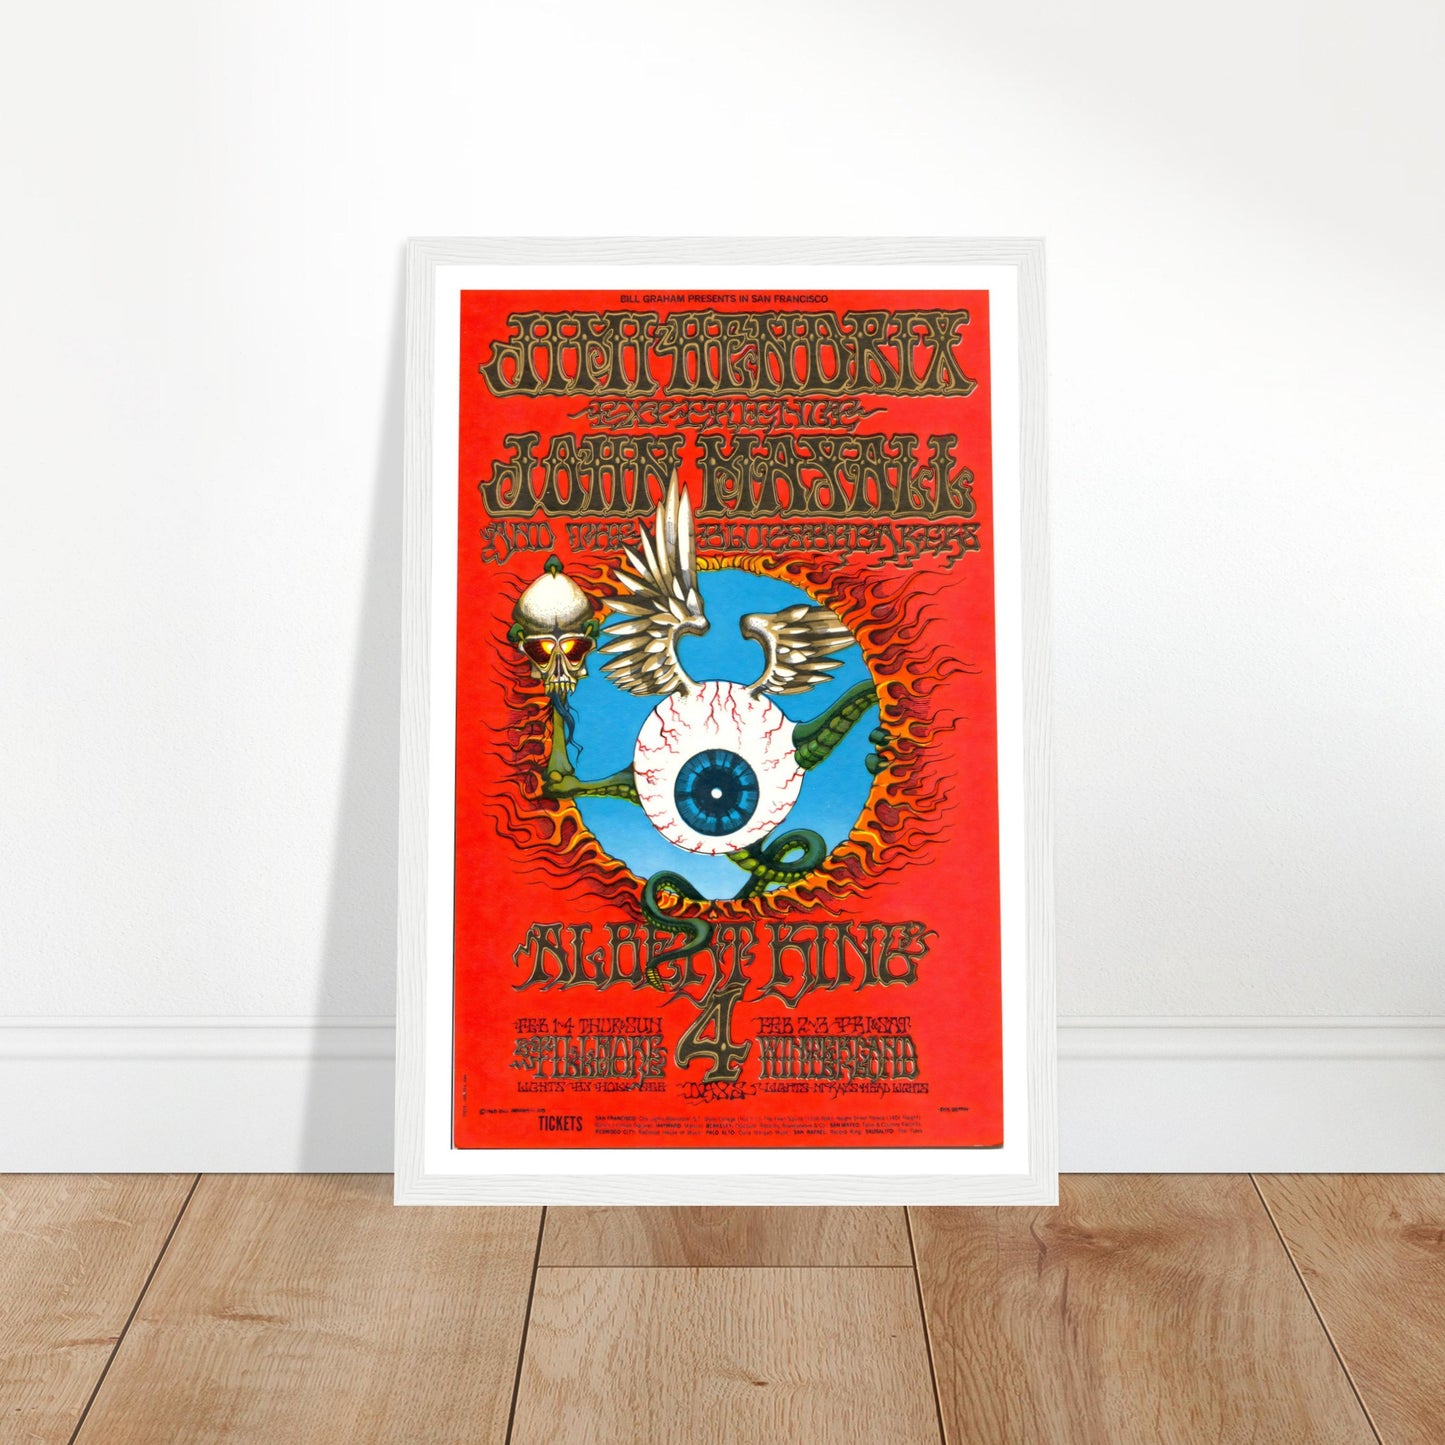 Vintage Poster Reprint, Jimi Hendrix and more, Wall Art on Premium Paper - Posterify